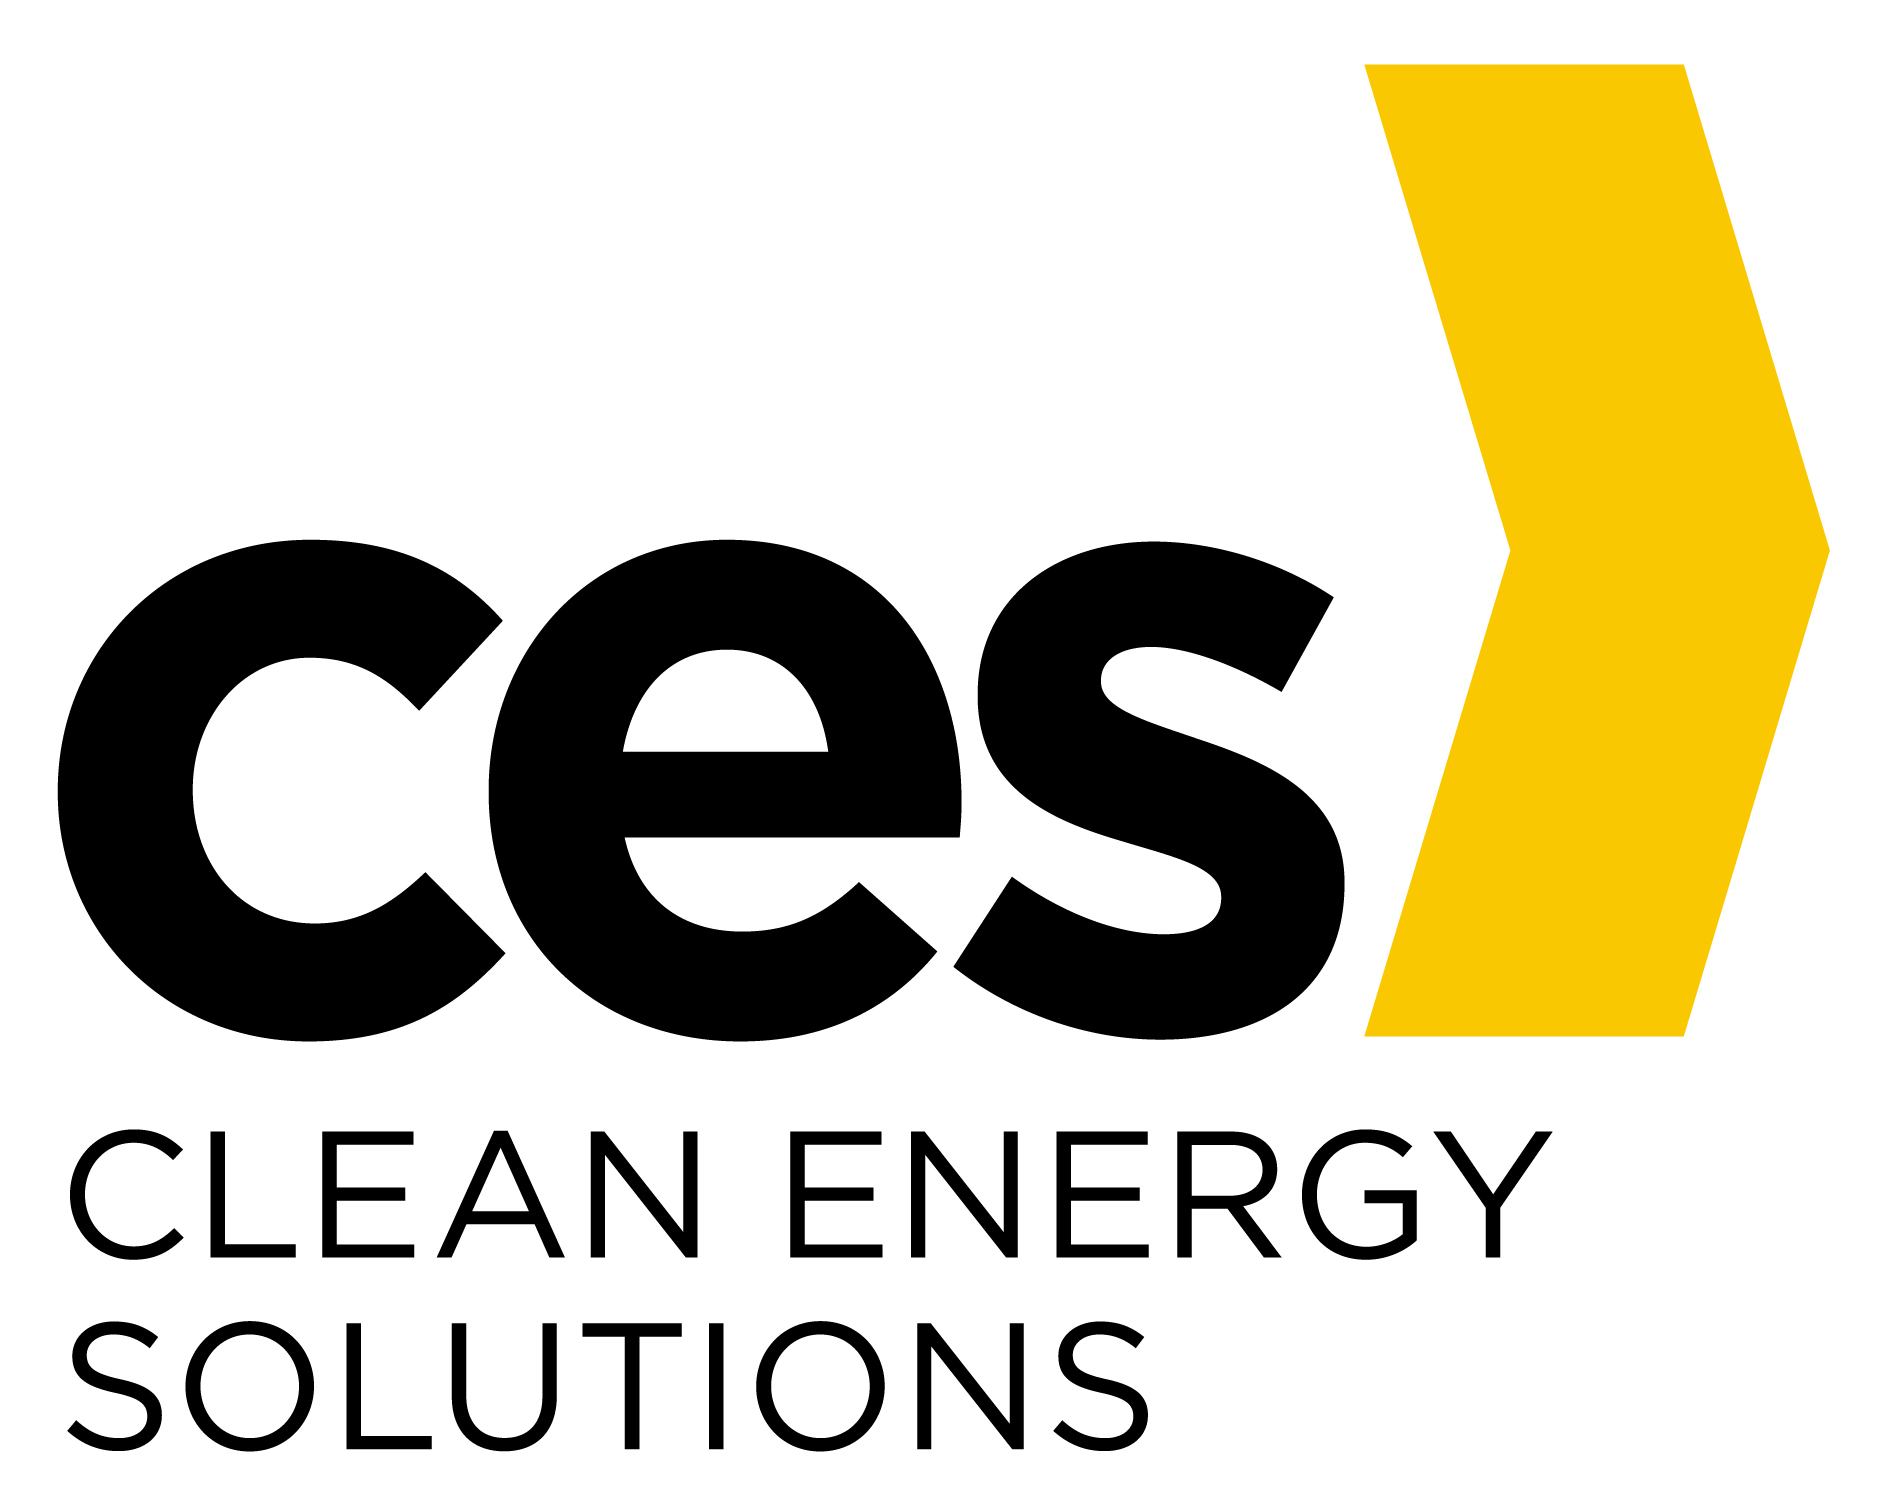 Logo of ces - clean energy solutions